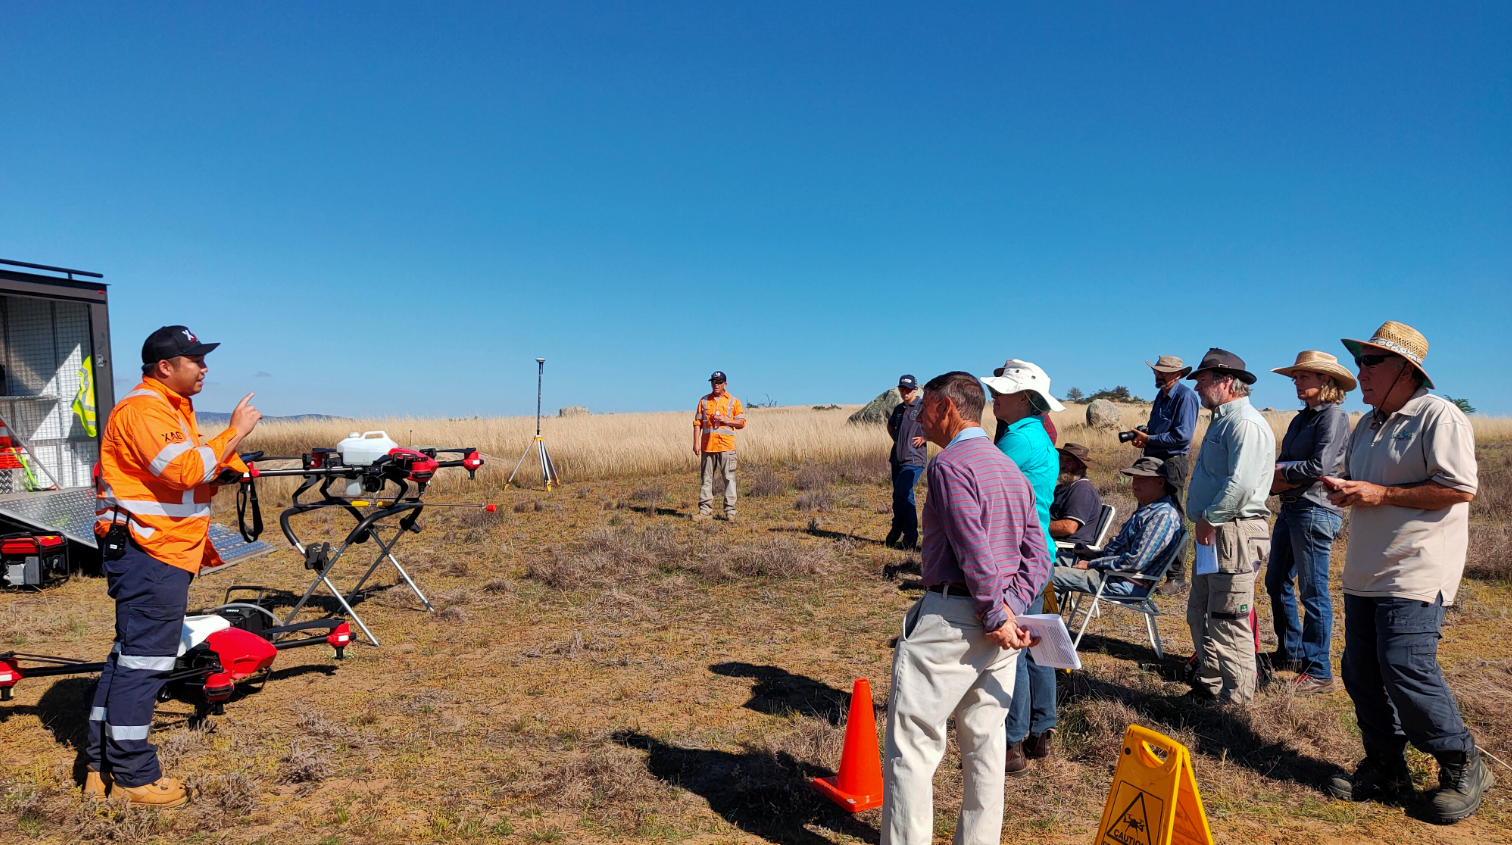 XAG drone pilot demonstrated the use of drones